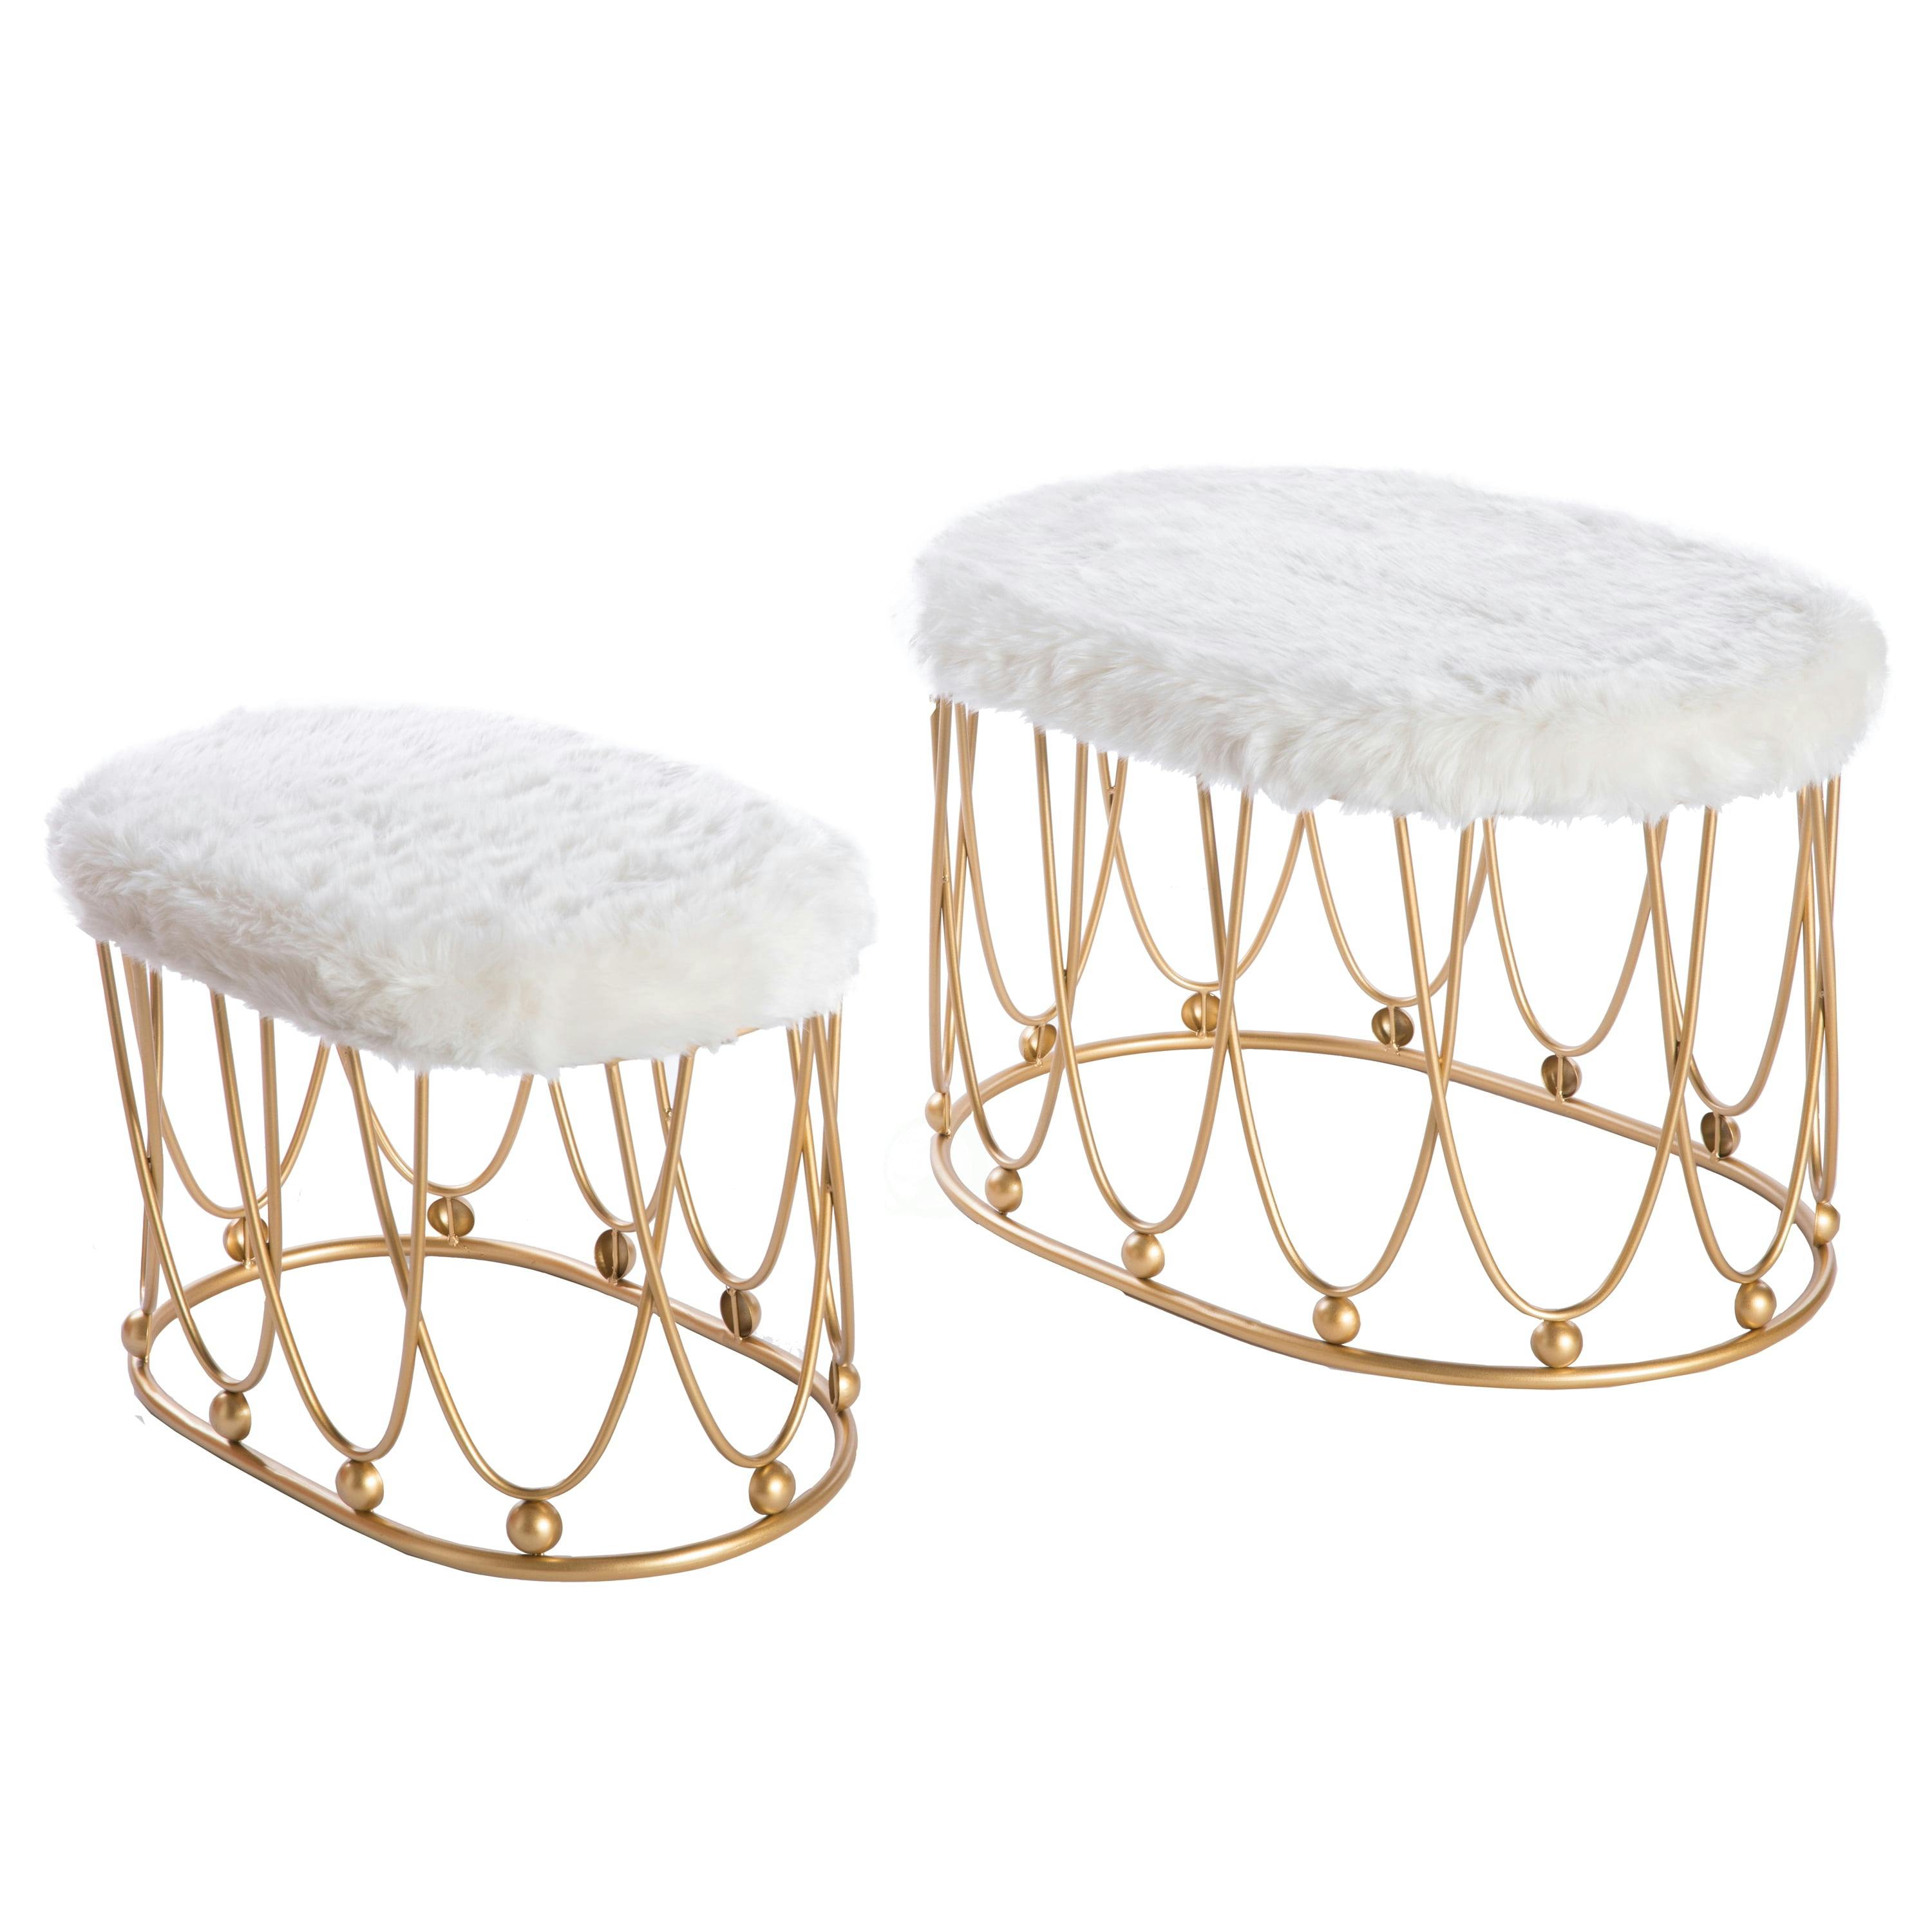 Chic Gold Oval Metal Accent Table Stools with Plush White Fur Top - Set of 2